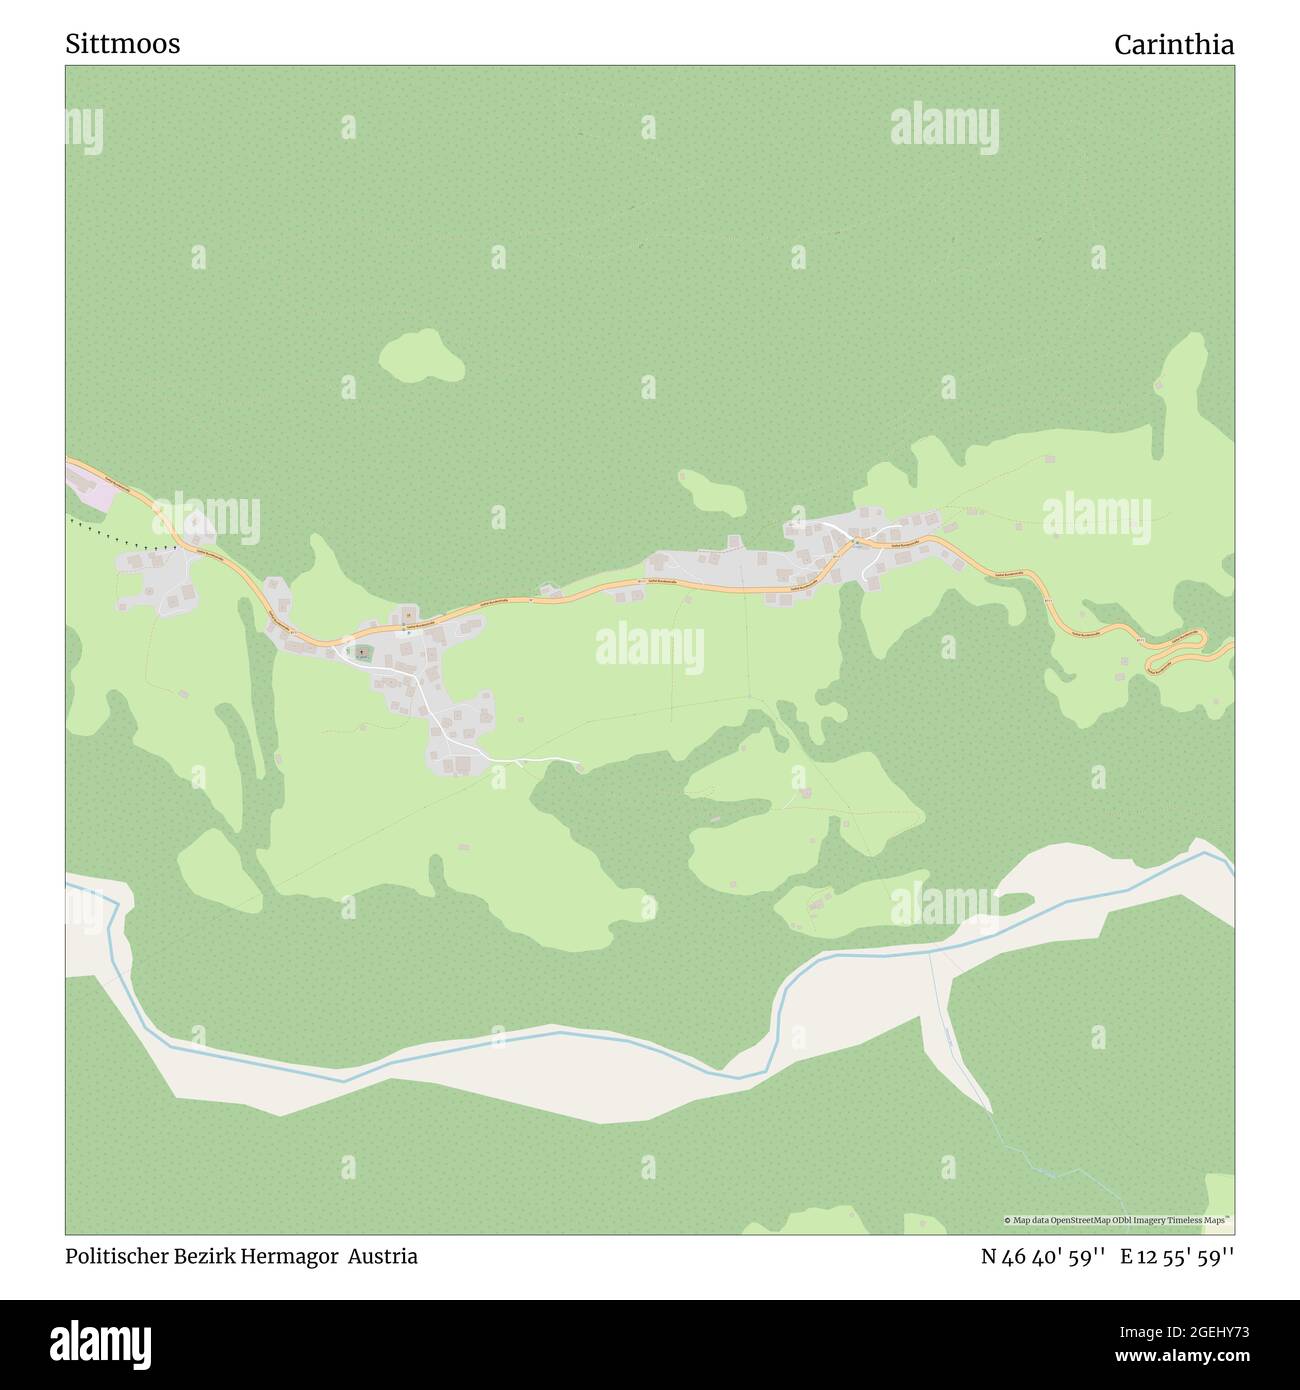 Sittmoos, Politischer Bezirk Hermagor, Austria, Carinthia, N 46 40' 59'', E 12 55' 59'', map, Timeless Map published in 2021. Travelers, explorers and adventurers like Florence Nightingale, David Livingstone, Ernest Shackleton, Lewis and Clark and Sherlock Holmes relied on maps to plan travels to the world's most remote corners, Timeless Maps is mapping most locations on the globe, showing the achievement of great dreams Stock Photo